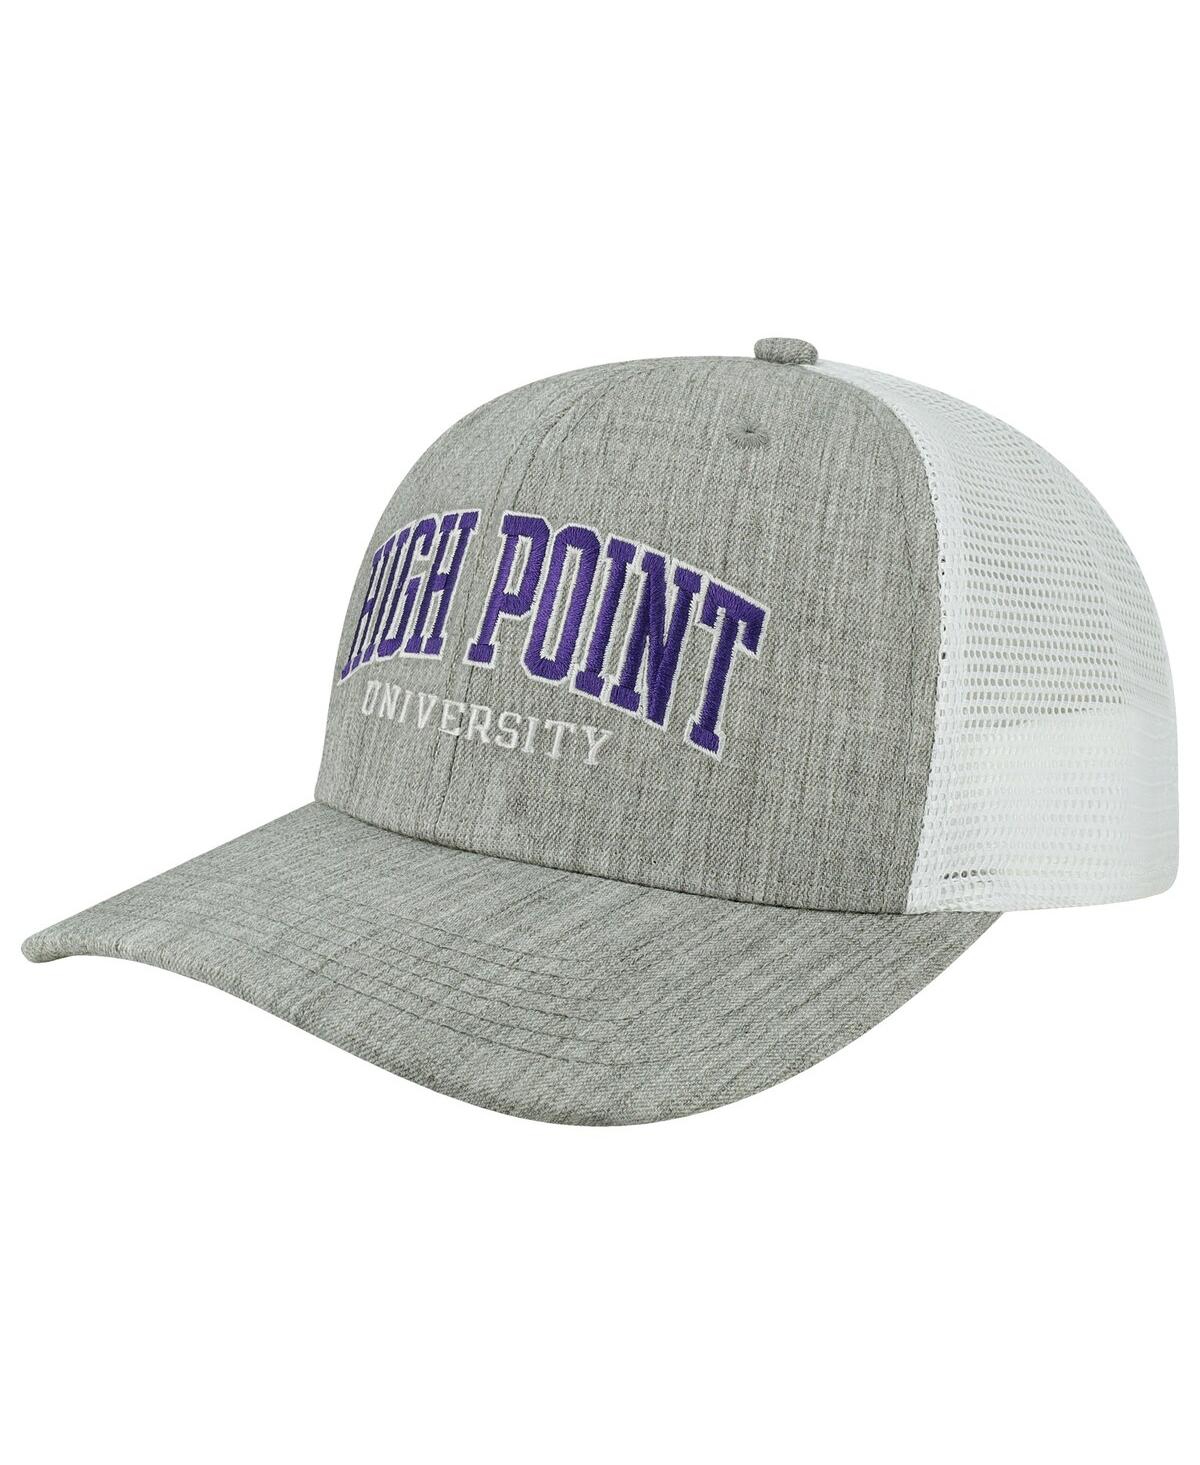 LEGACY ATHLETIC MEN'S HEATHER GRAY, WHITE HIGH POINT PANTHERS ARCH TRUCKER SNAPBACK HAT